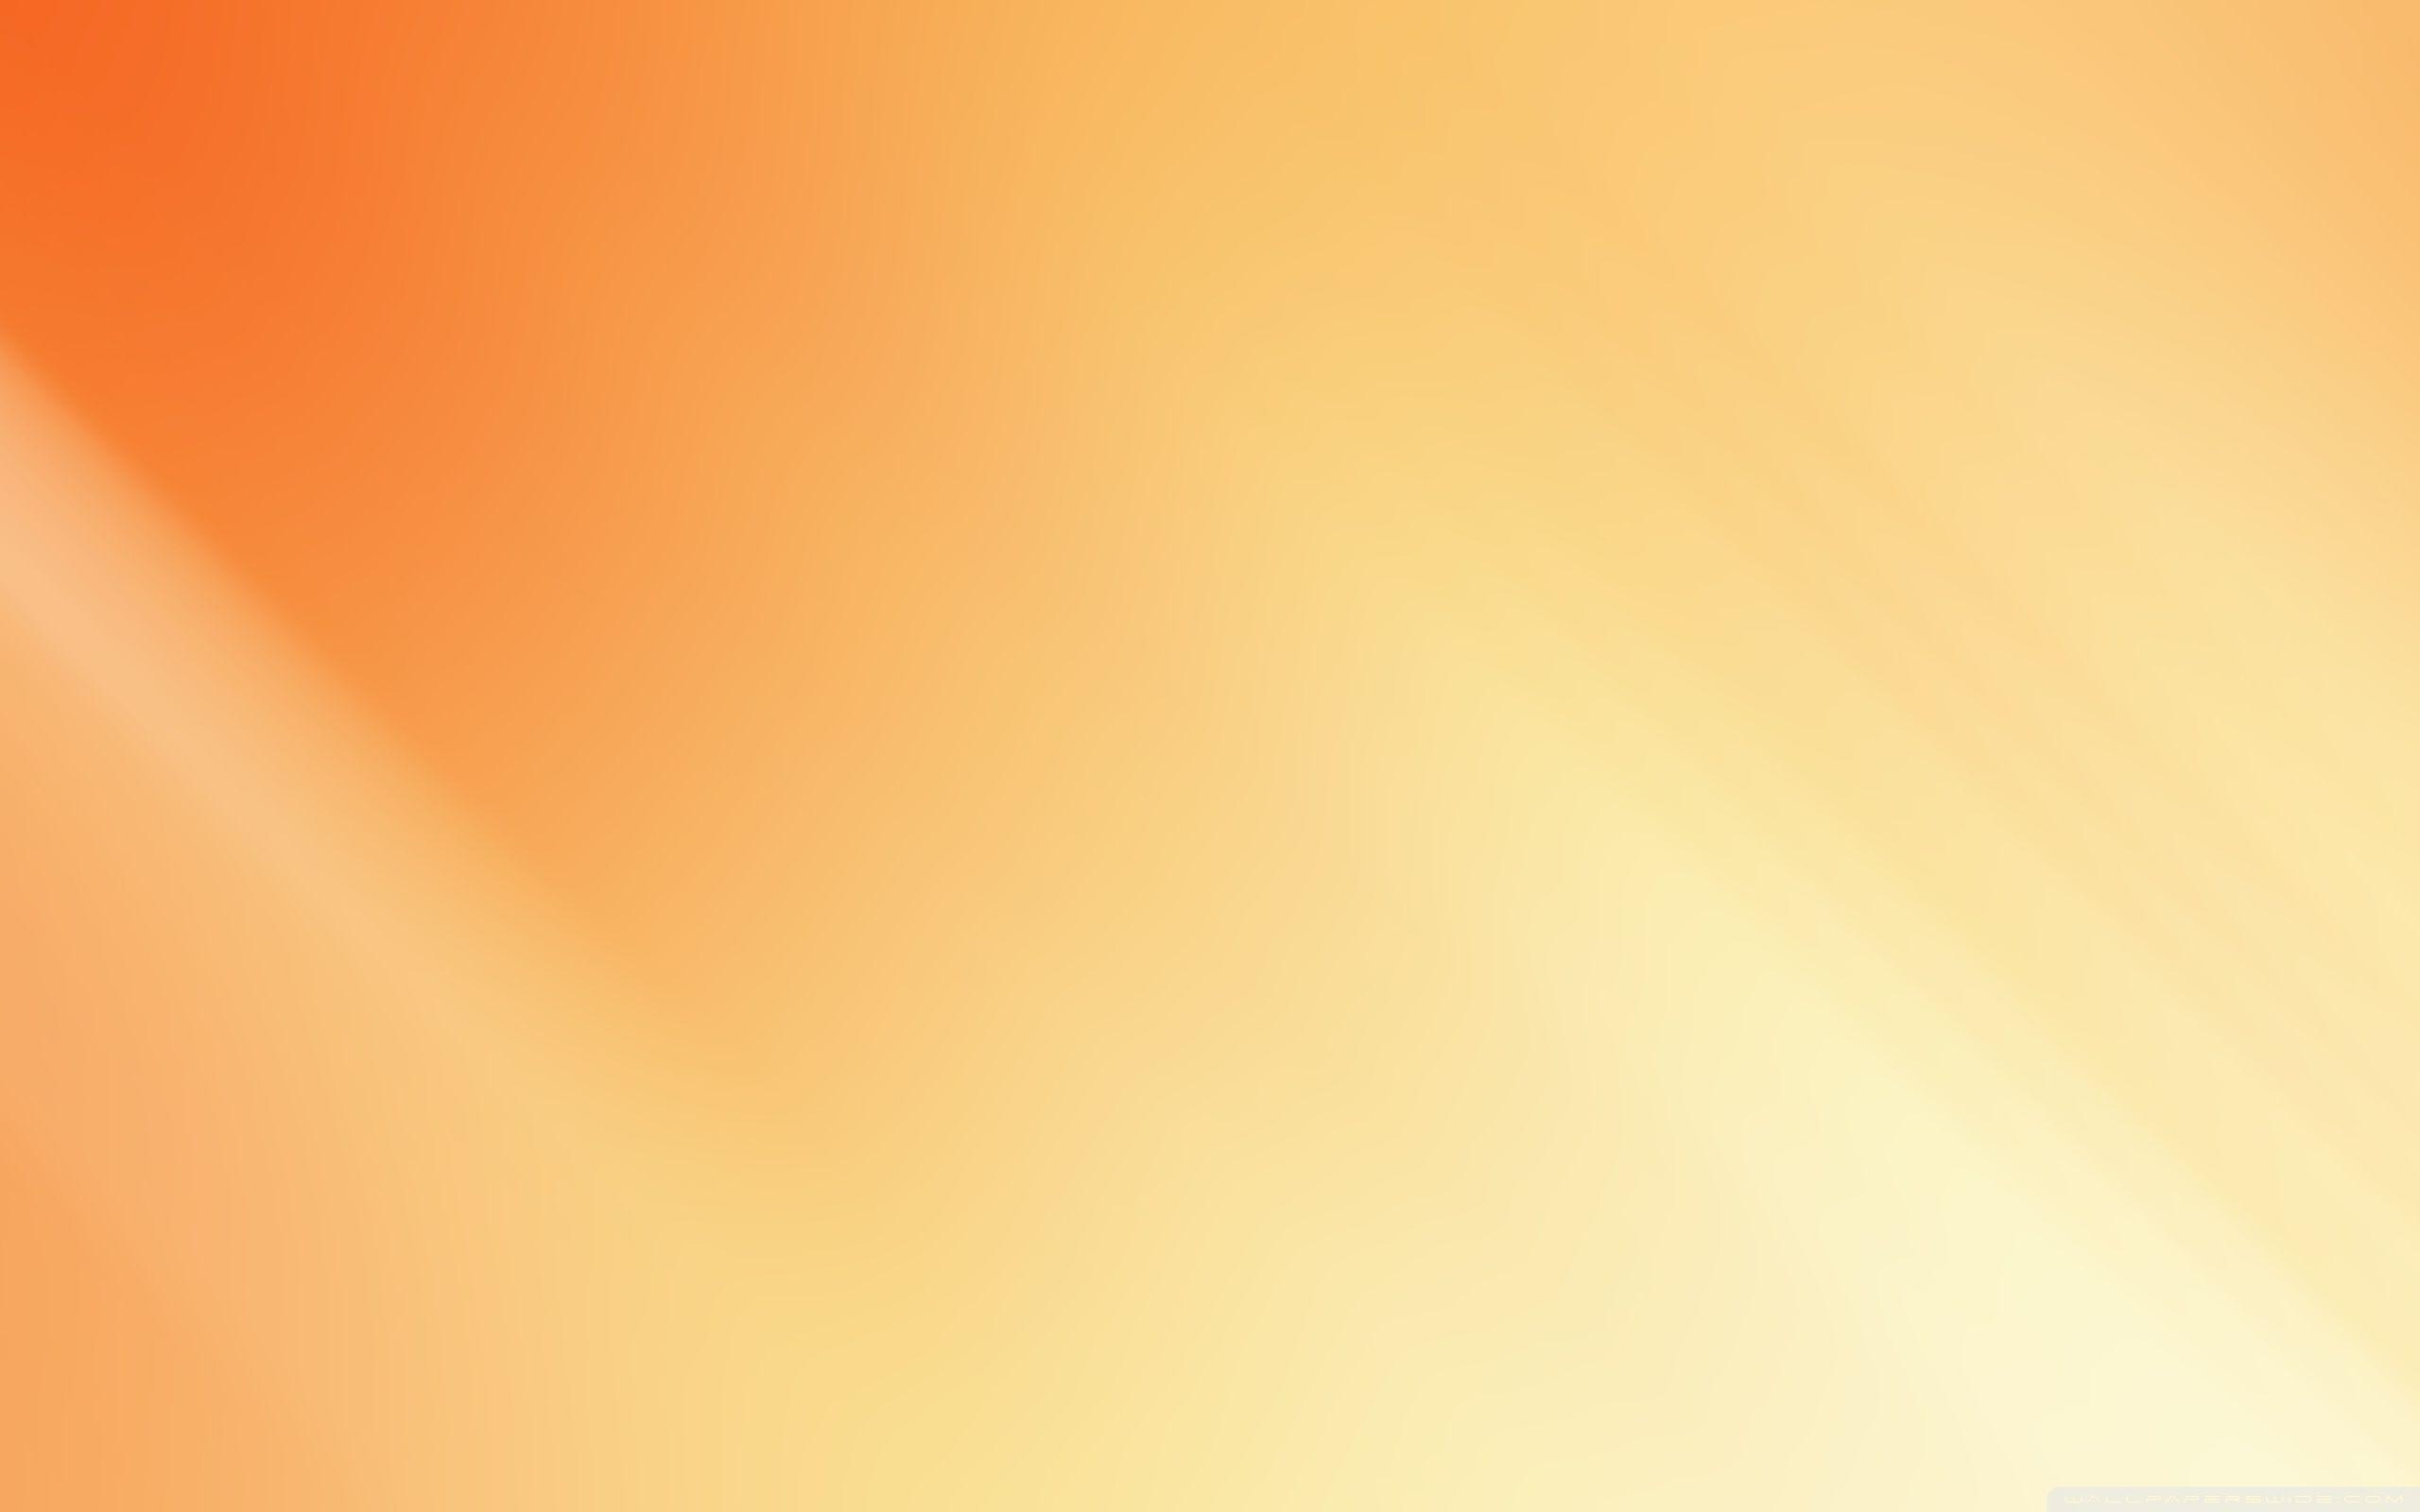 Simple Orange and White Background Graphic